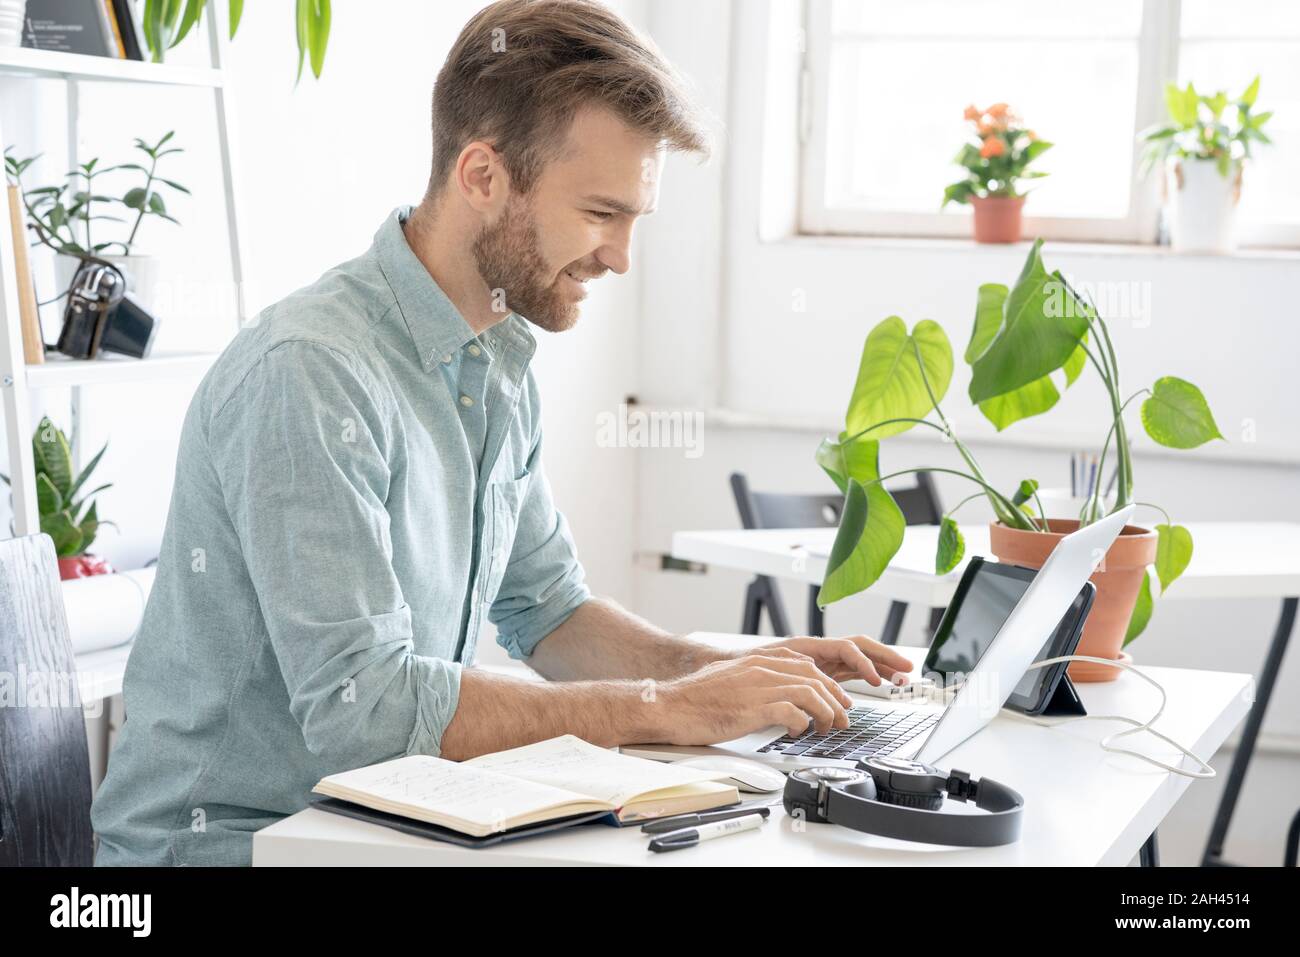 Smiling man using laptop at desk in office Banque D'Images